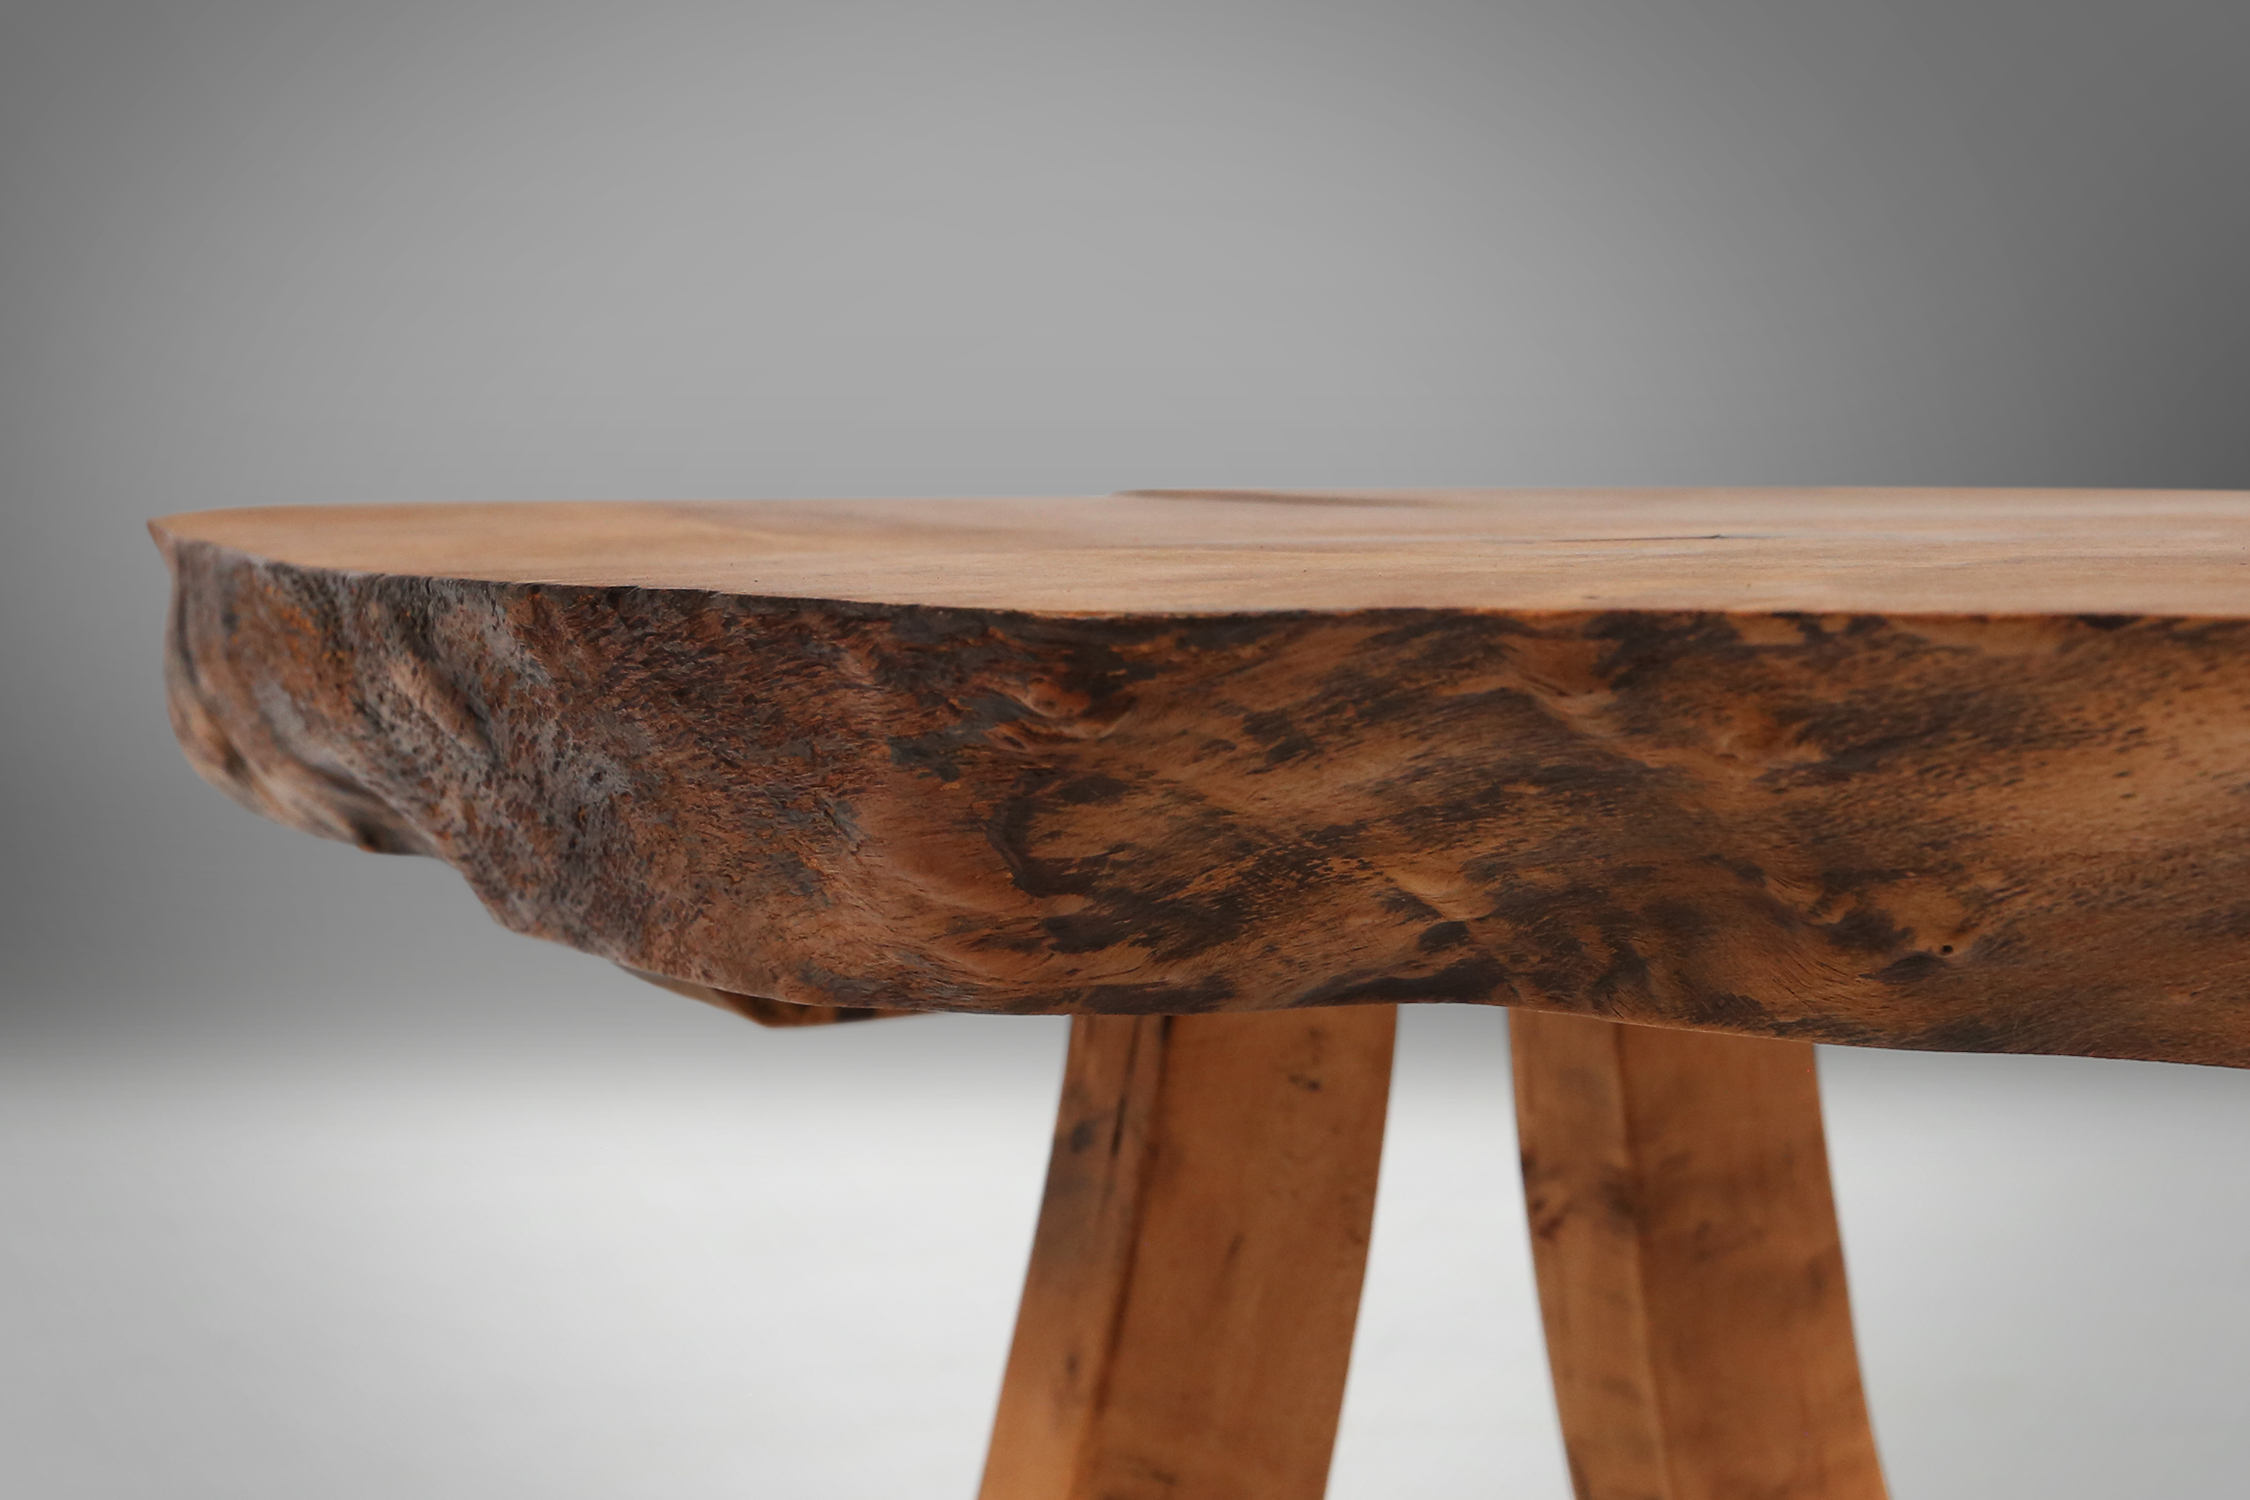 Sculptural carved tree trunk coffee table in oak, France ca. 1850thumbnail